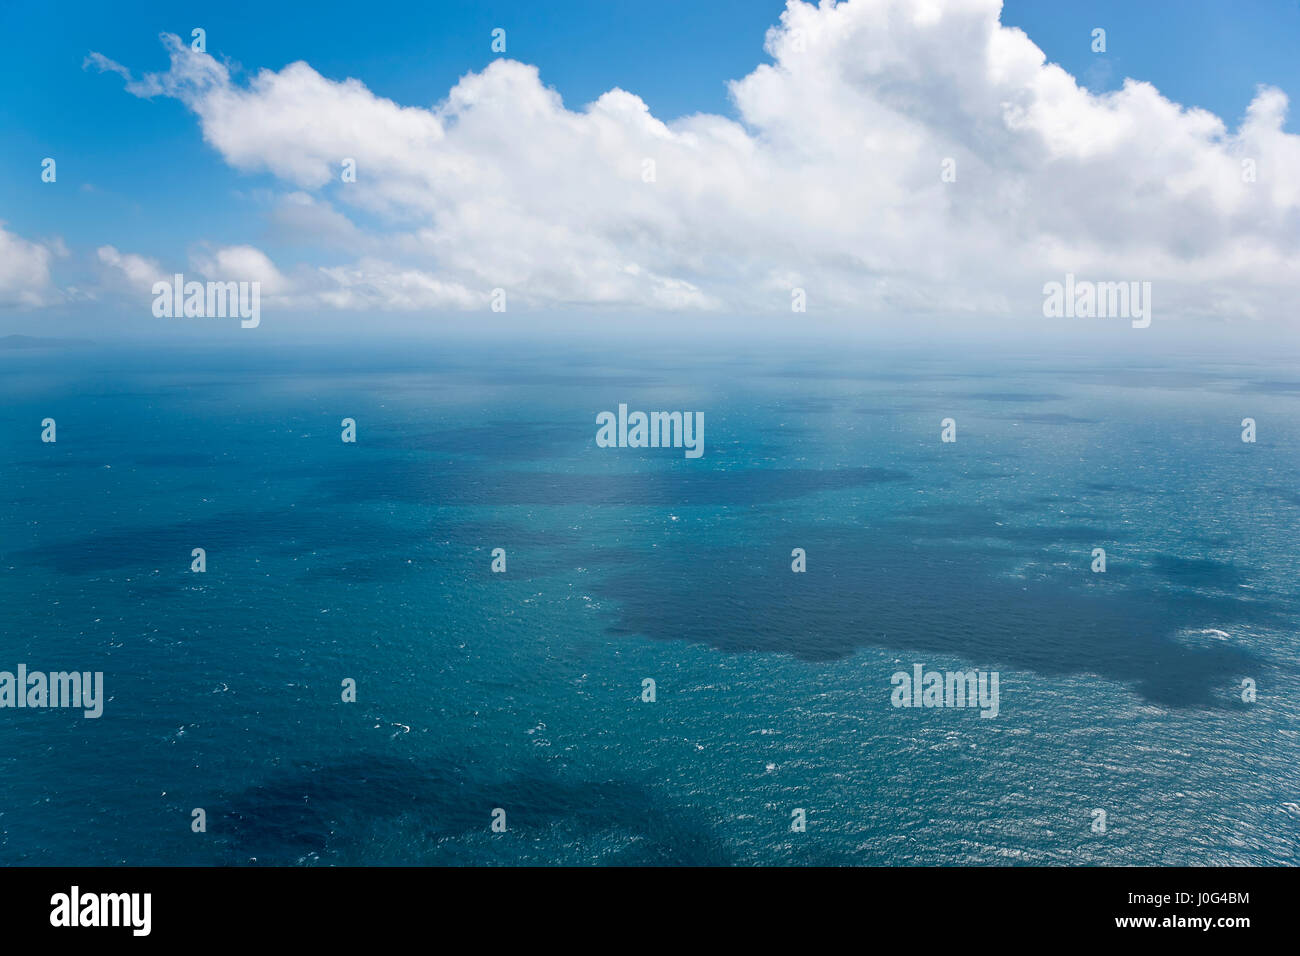 Seascape, aerial view, Great Barrier Reef, Queensland, Australia Stock Photo